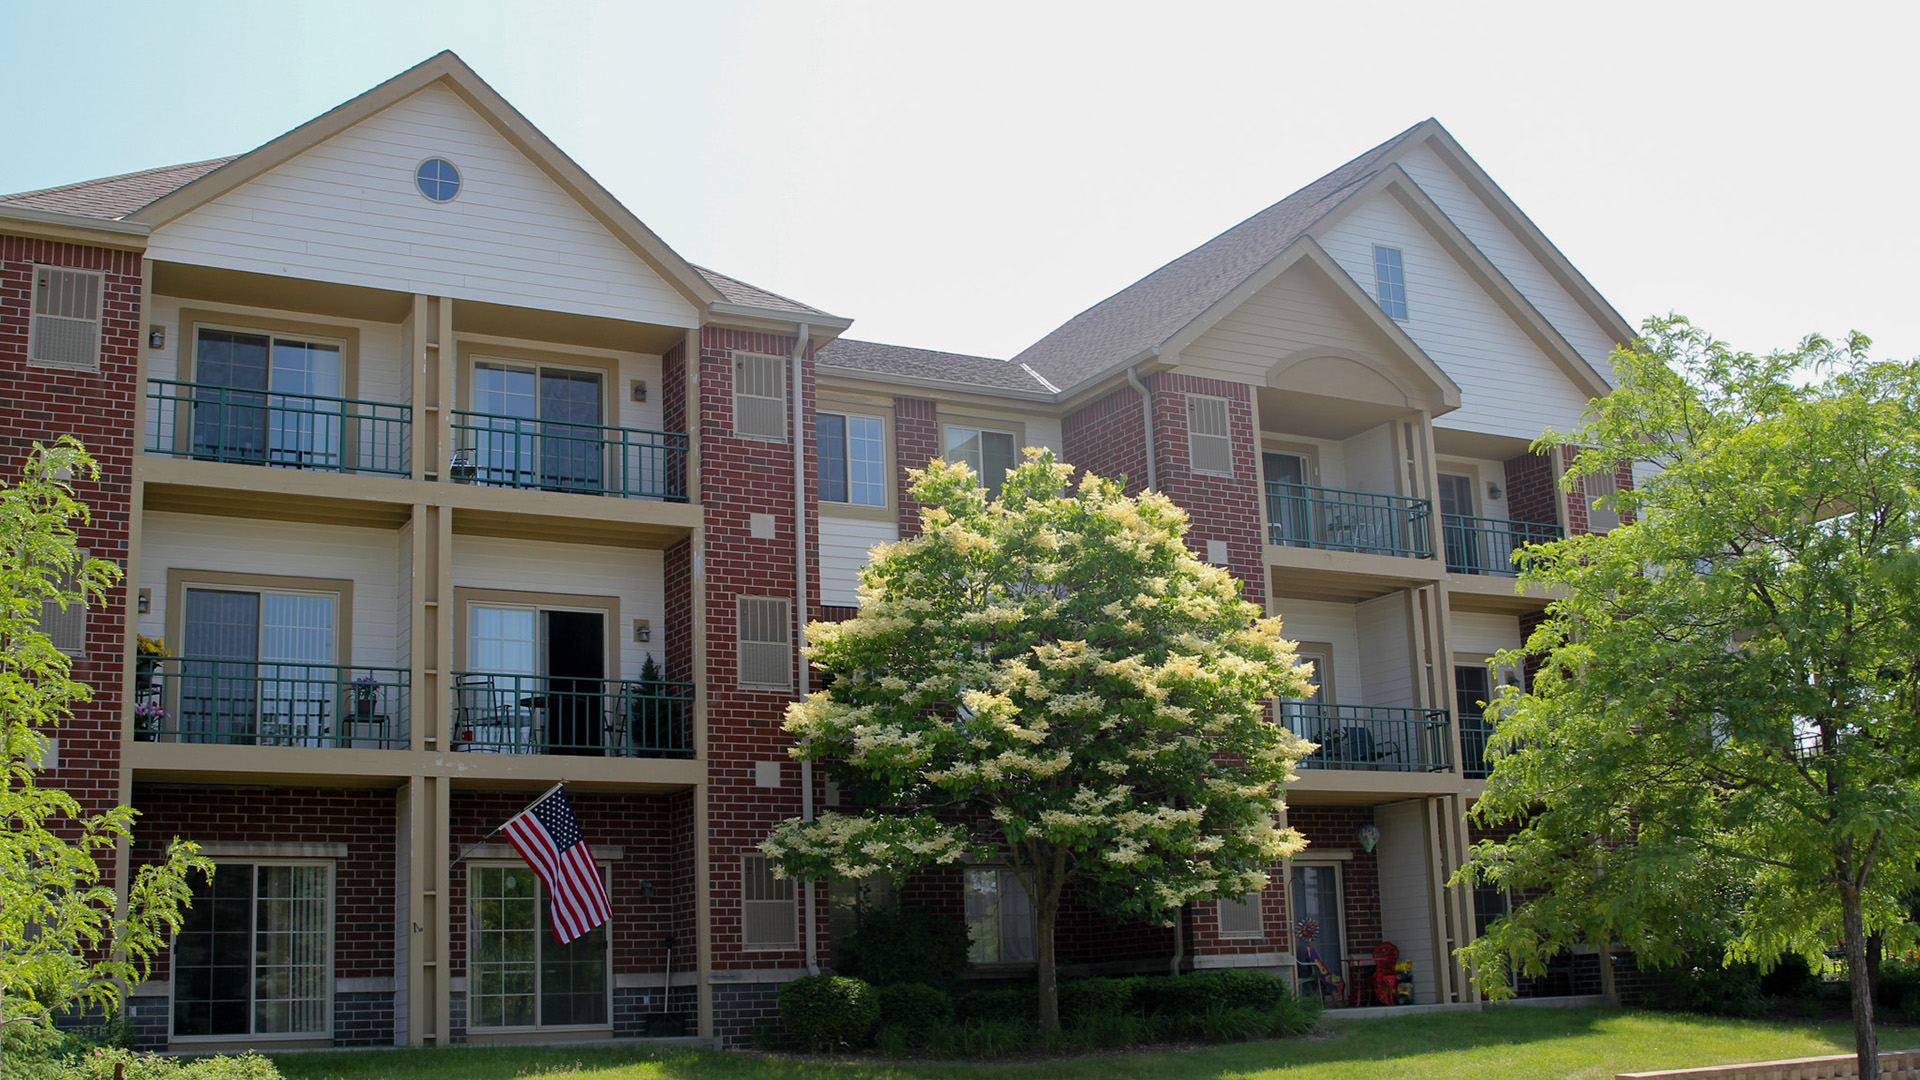 Sunshine illuminates a multi-story residential building with patios and decks alternating with windows, topped by multiple gable roofs, with a U.S. flag mounted on a wall in front of one unit and trees in the foreground.